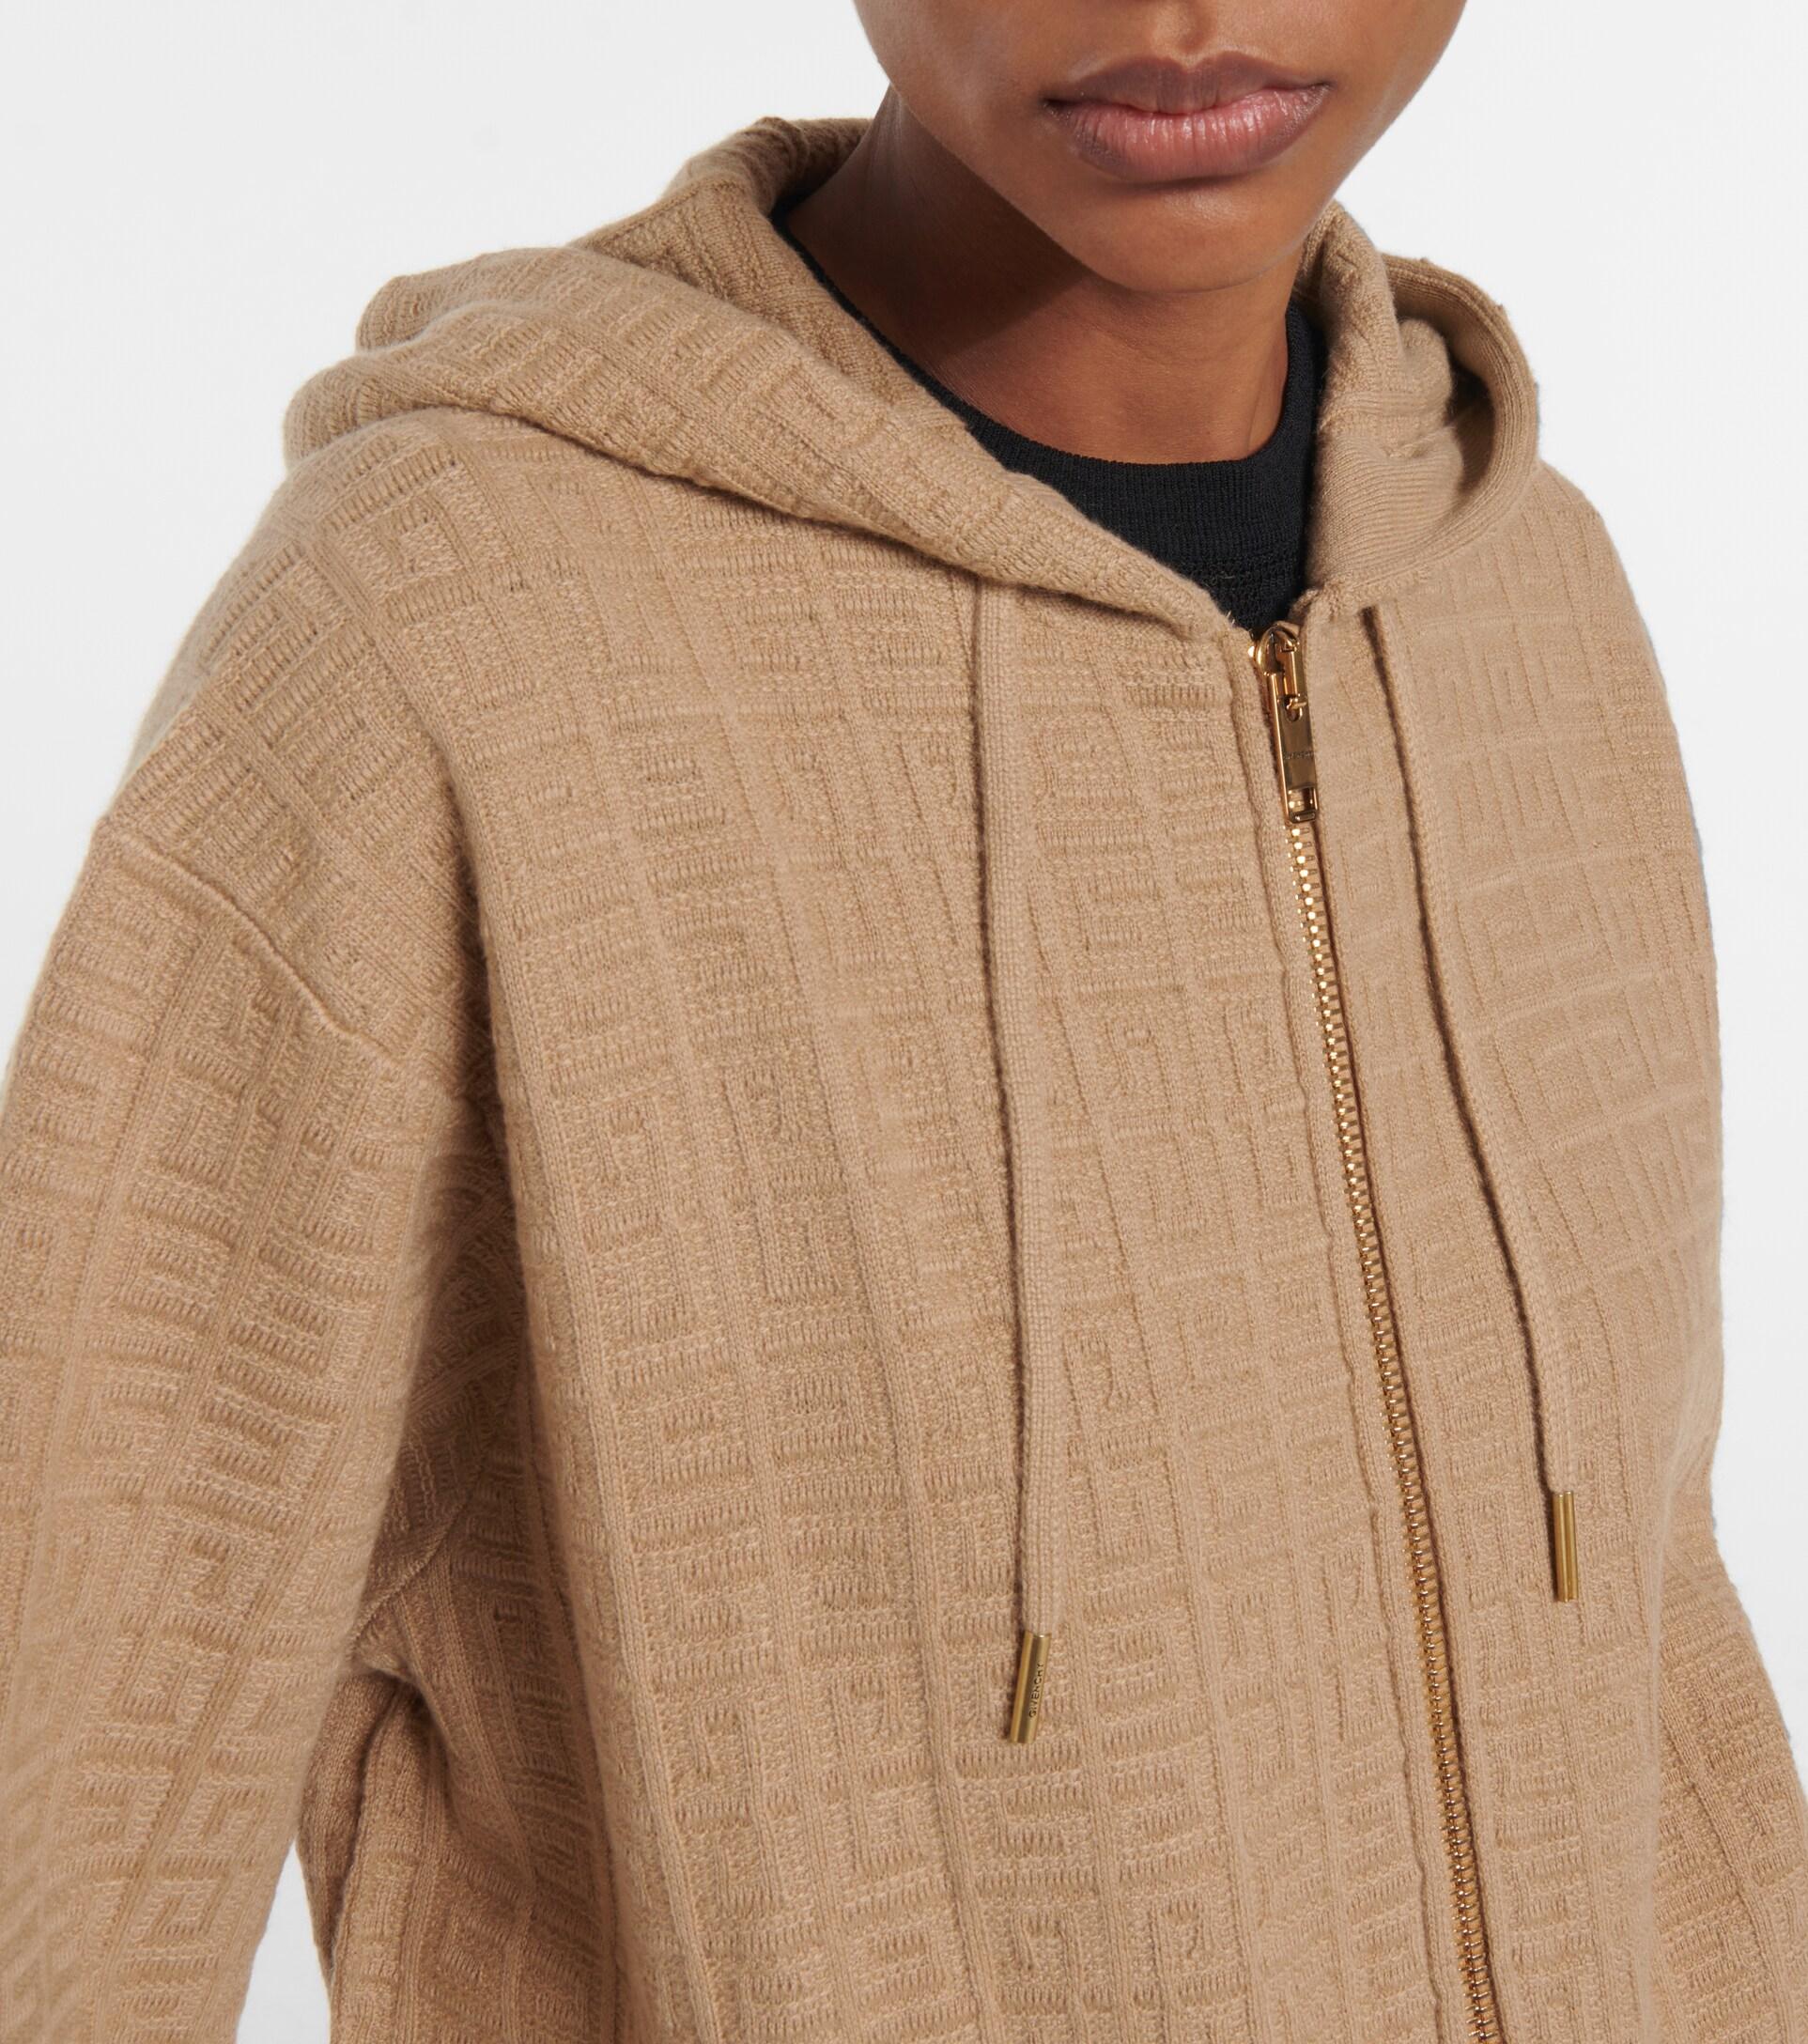 Givenchy 4g Jacquard Zipped Hoodie in Natural | Lyst